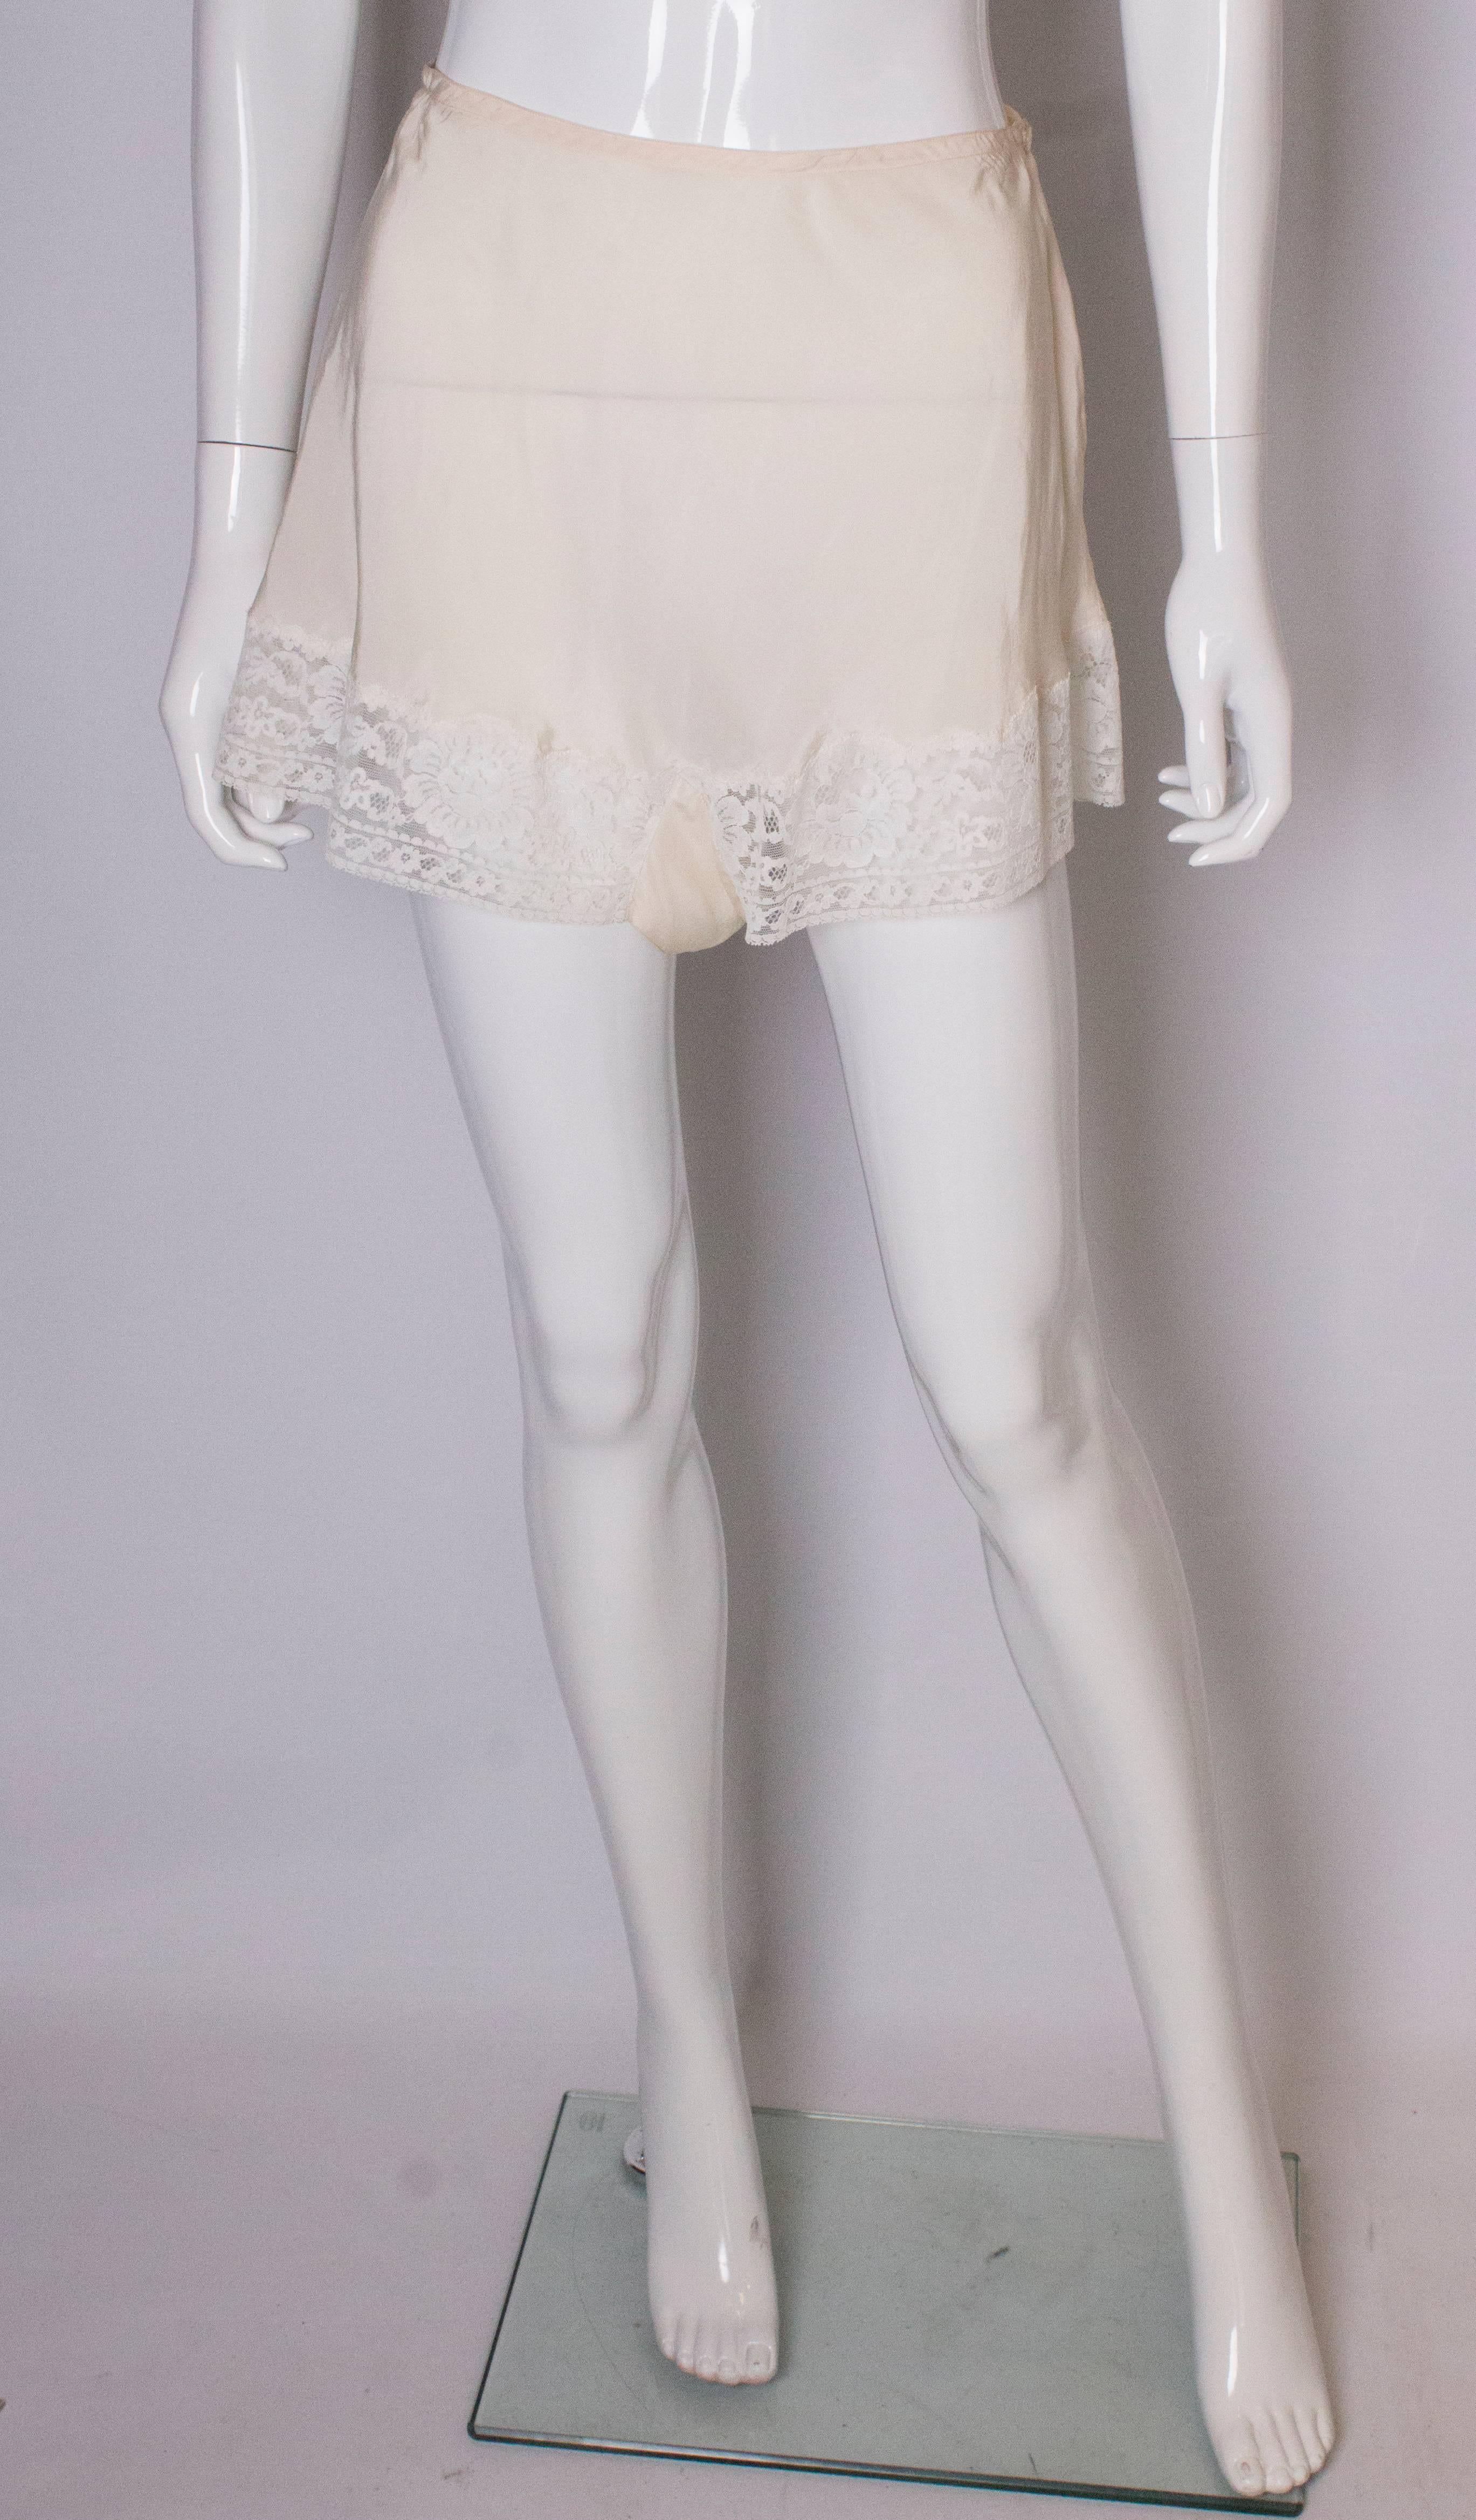 A chic pair of ivory silk pants/shorts by Unique. They are marked size 36 and have a lace tri.